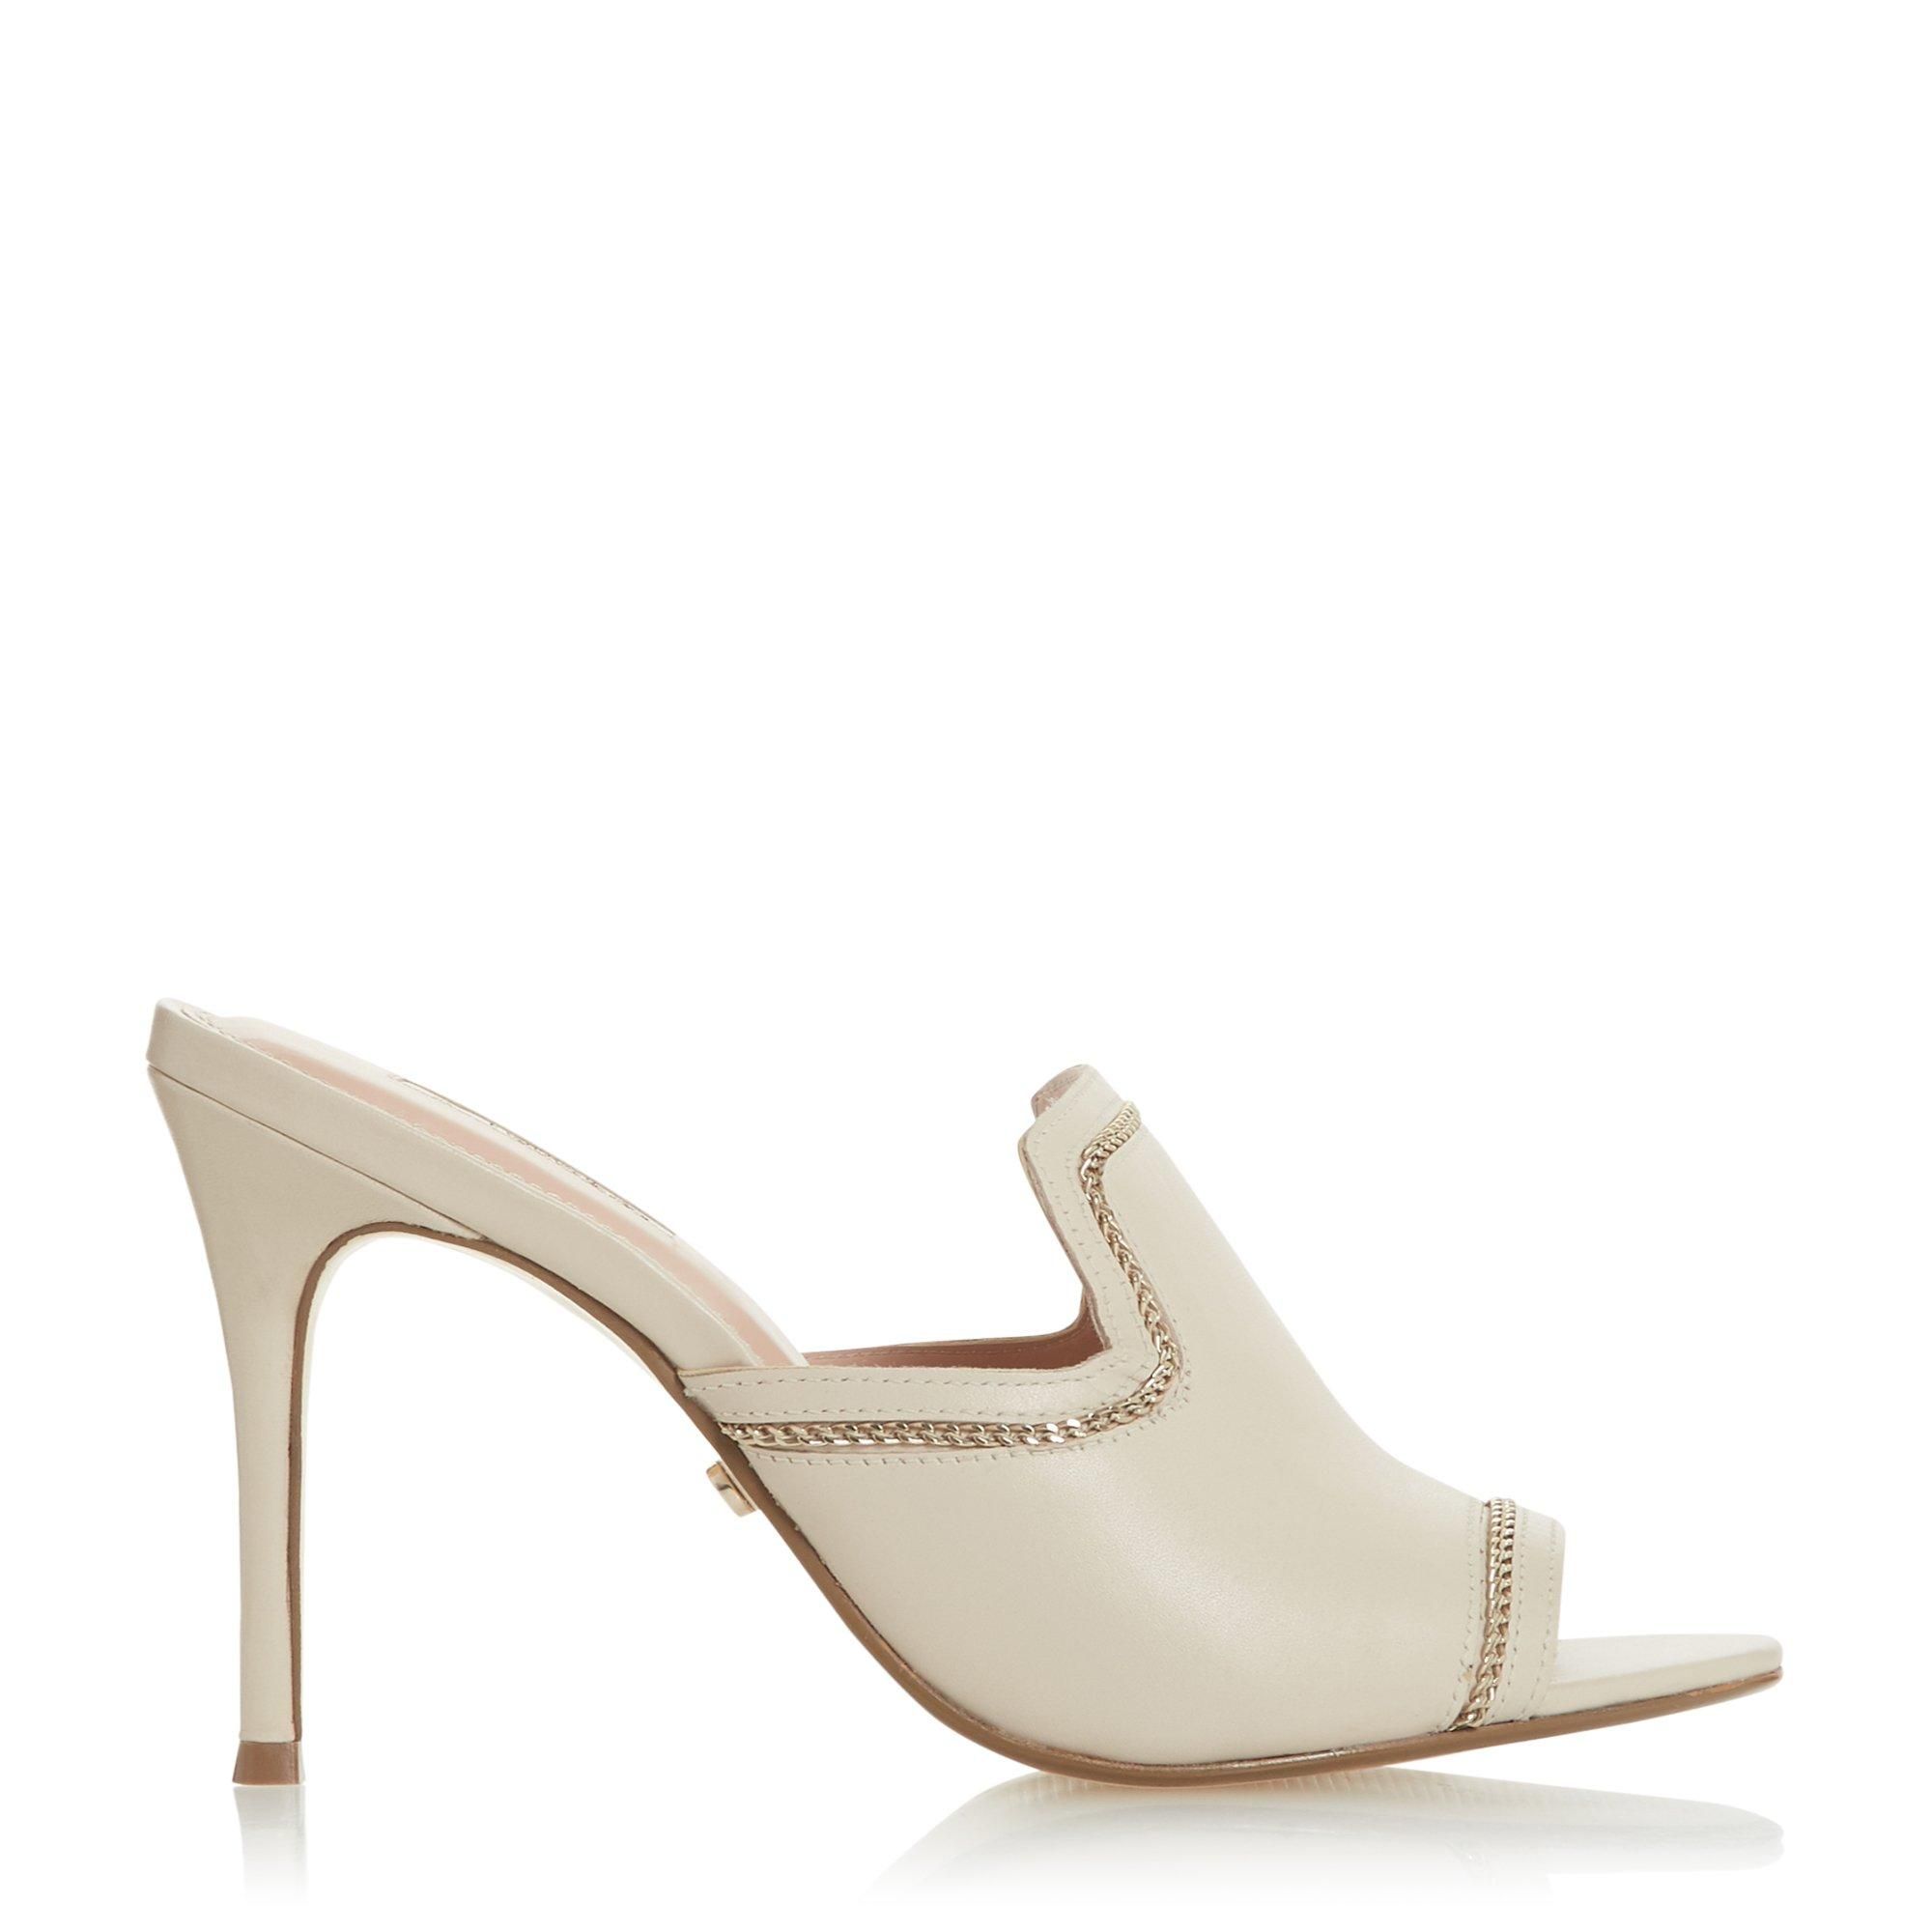 Add a dose of contemporary style to your line-up with this mule sandal. Offsetting a minimalist base with hardware, it sits on a stiletto heel. It's complete with a modern cut-out design on the sides.